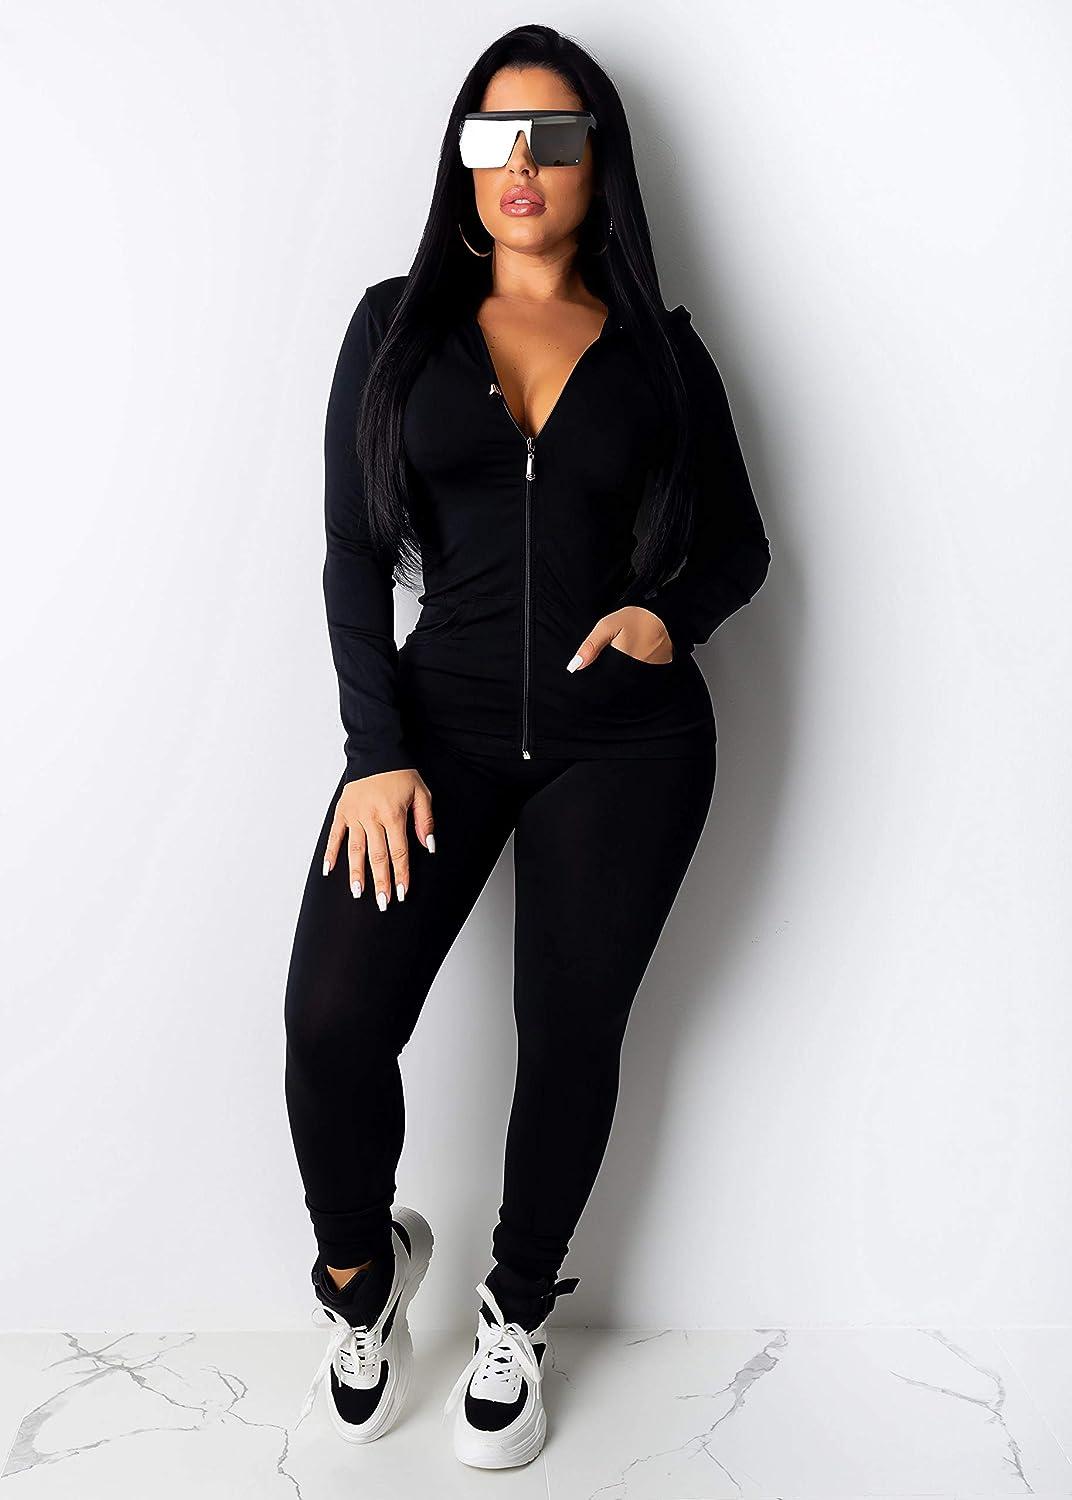 Plus Size Sweatsuit Set Set Black Long Sleeve Sweatsuits And Casual Jogger  Outfits In 3XL, 4XL 5XL Sizes Fall/Winter Clothing Oversize Two Piece  Jogging Suit 6106 From Sell_clothing, $26.62